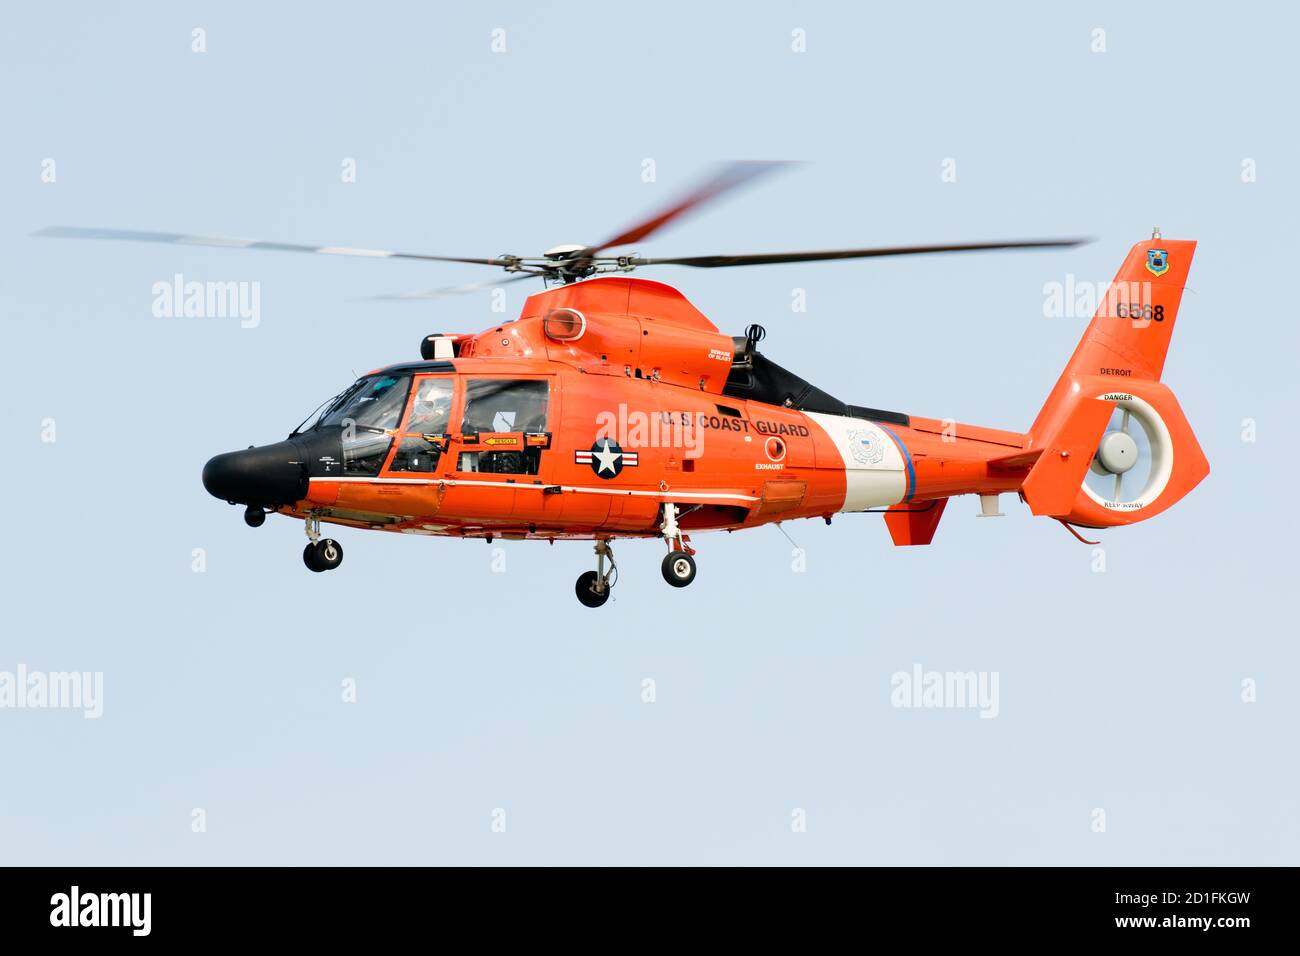 A US Coast Guard MH-65 Dolphin helicopter as it performs at Airshow London Skydrive 2020 in London, Ontario, Canada. Stock Photo